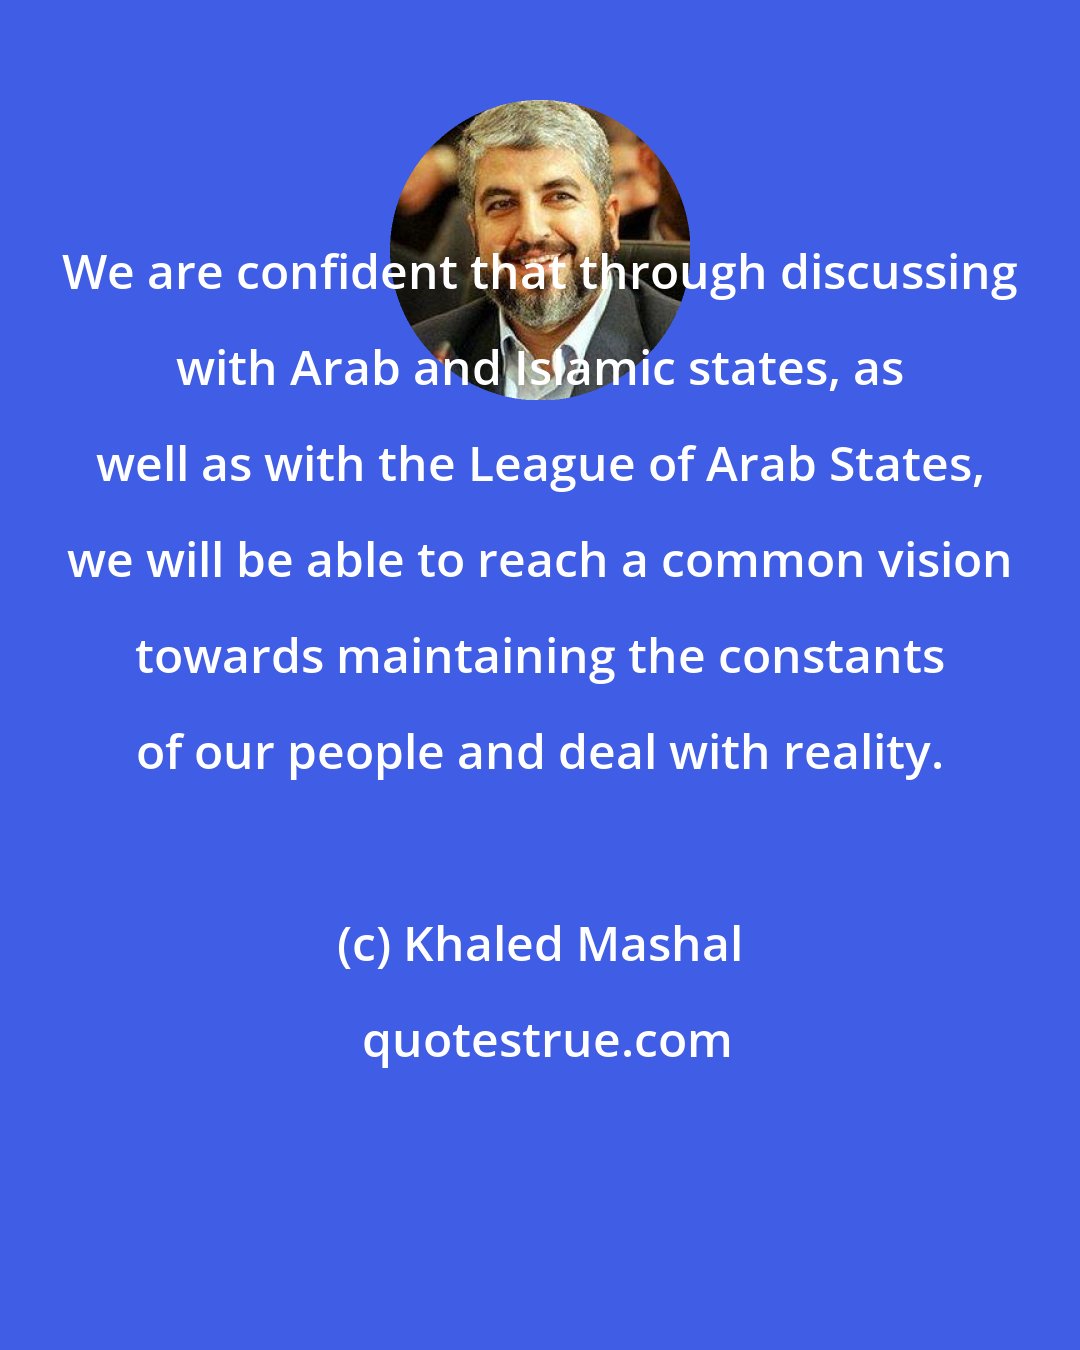 Khaled Mashal: We are confident that through discussing with Arab and Islamic states, as well as with the League of Arab States, we will be able to reach a common vision towards maintaining the constants of our people and deal with reality.